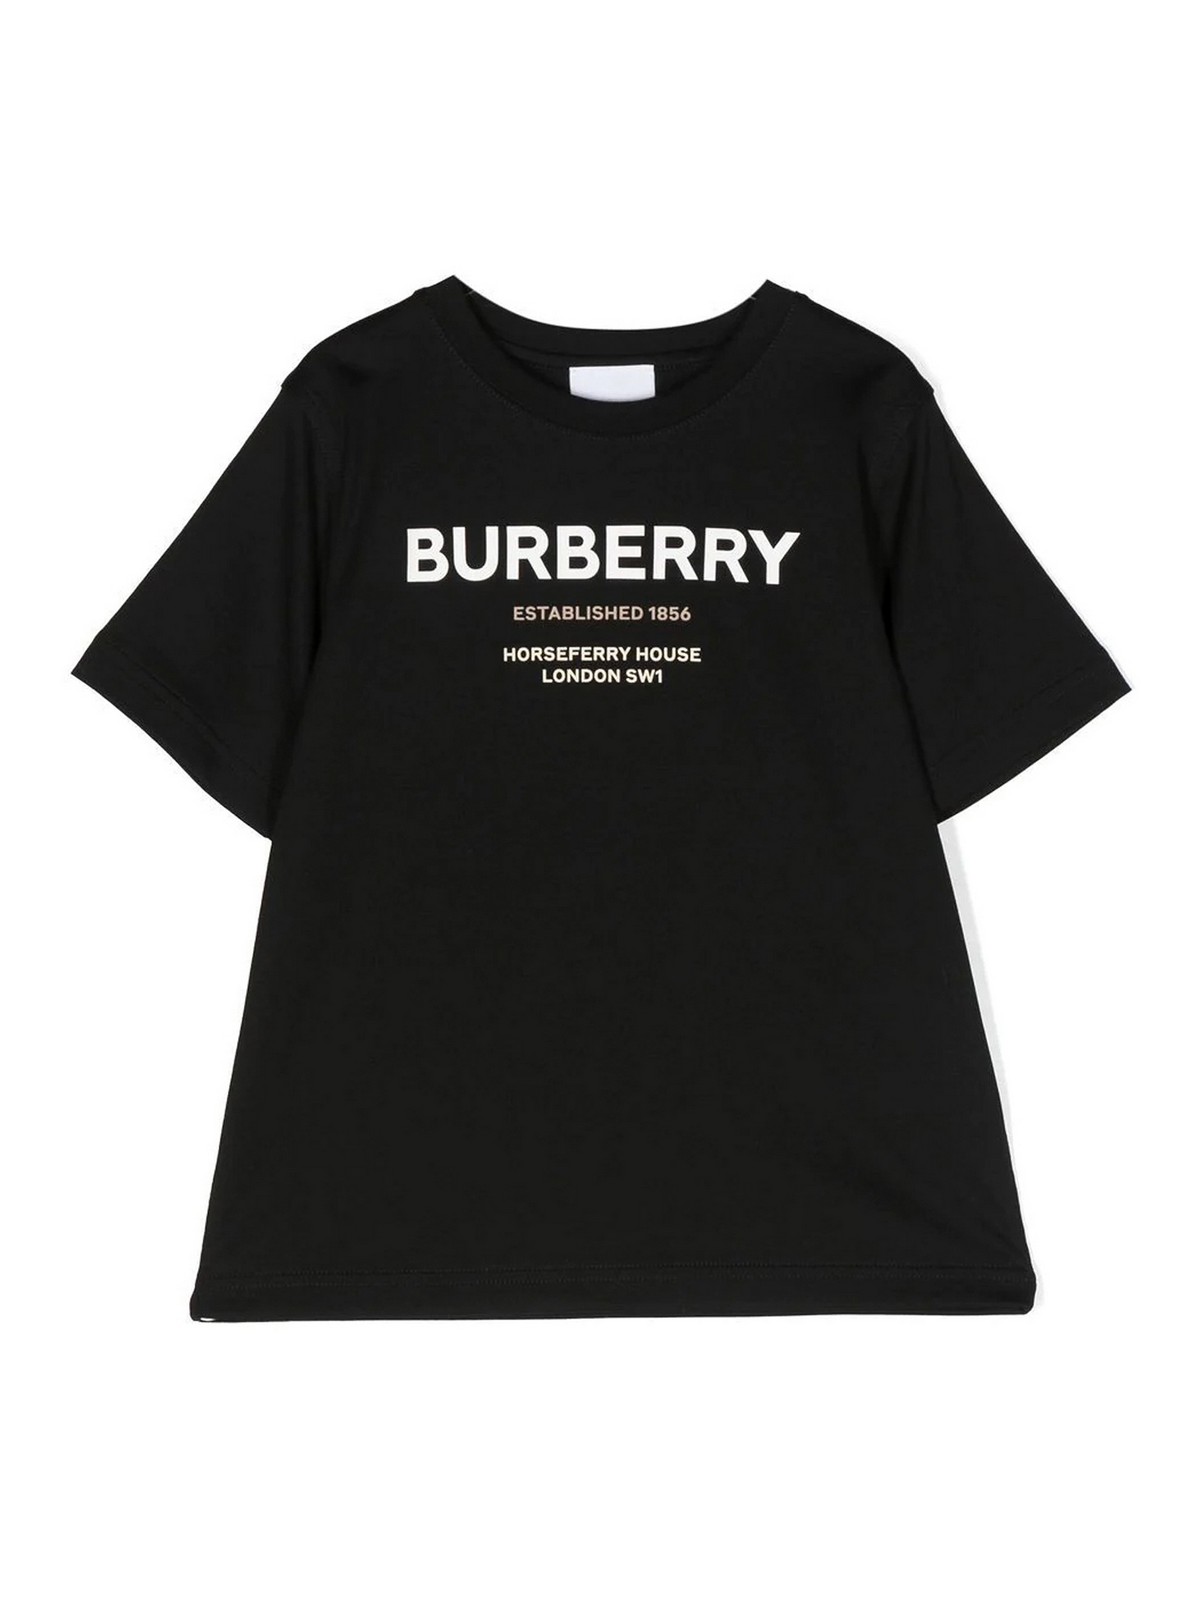 Tシャツ Burberry - Tシャツ - 黒 - 8064569A1189 | THEBS